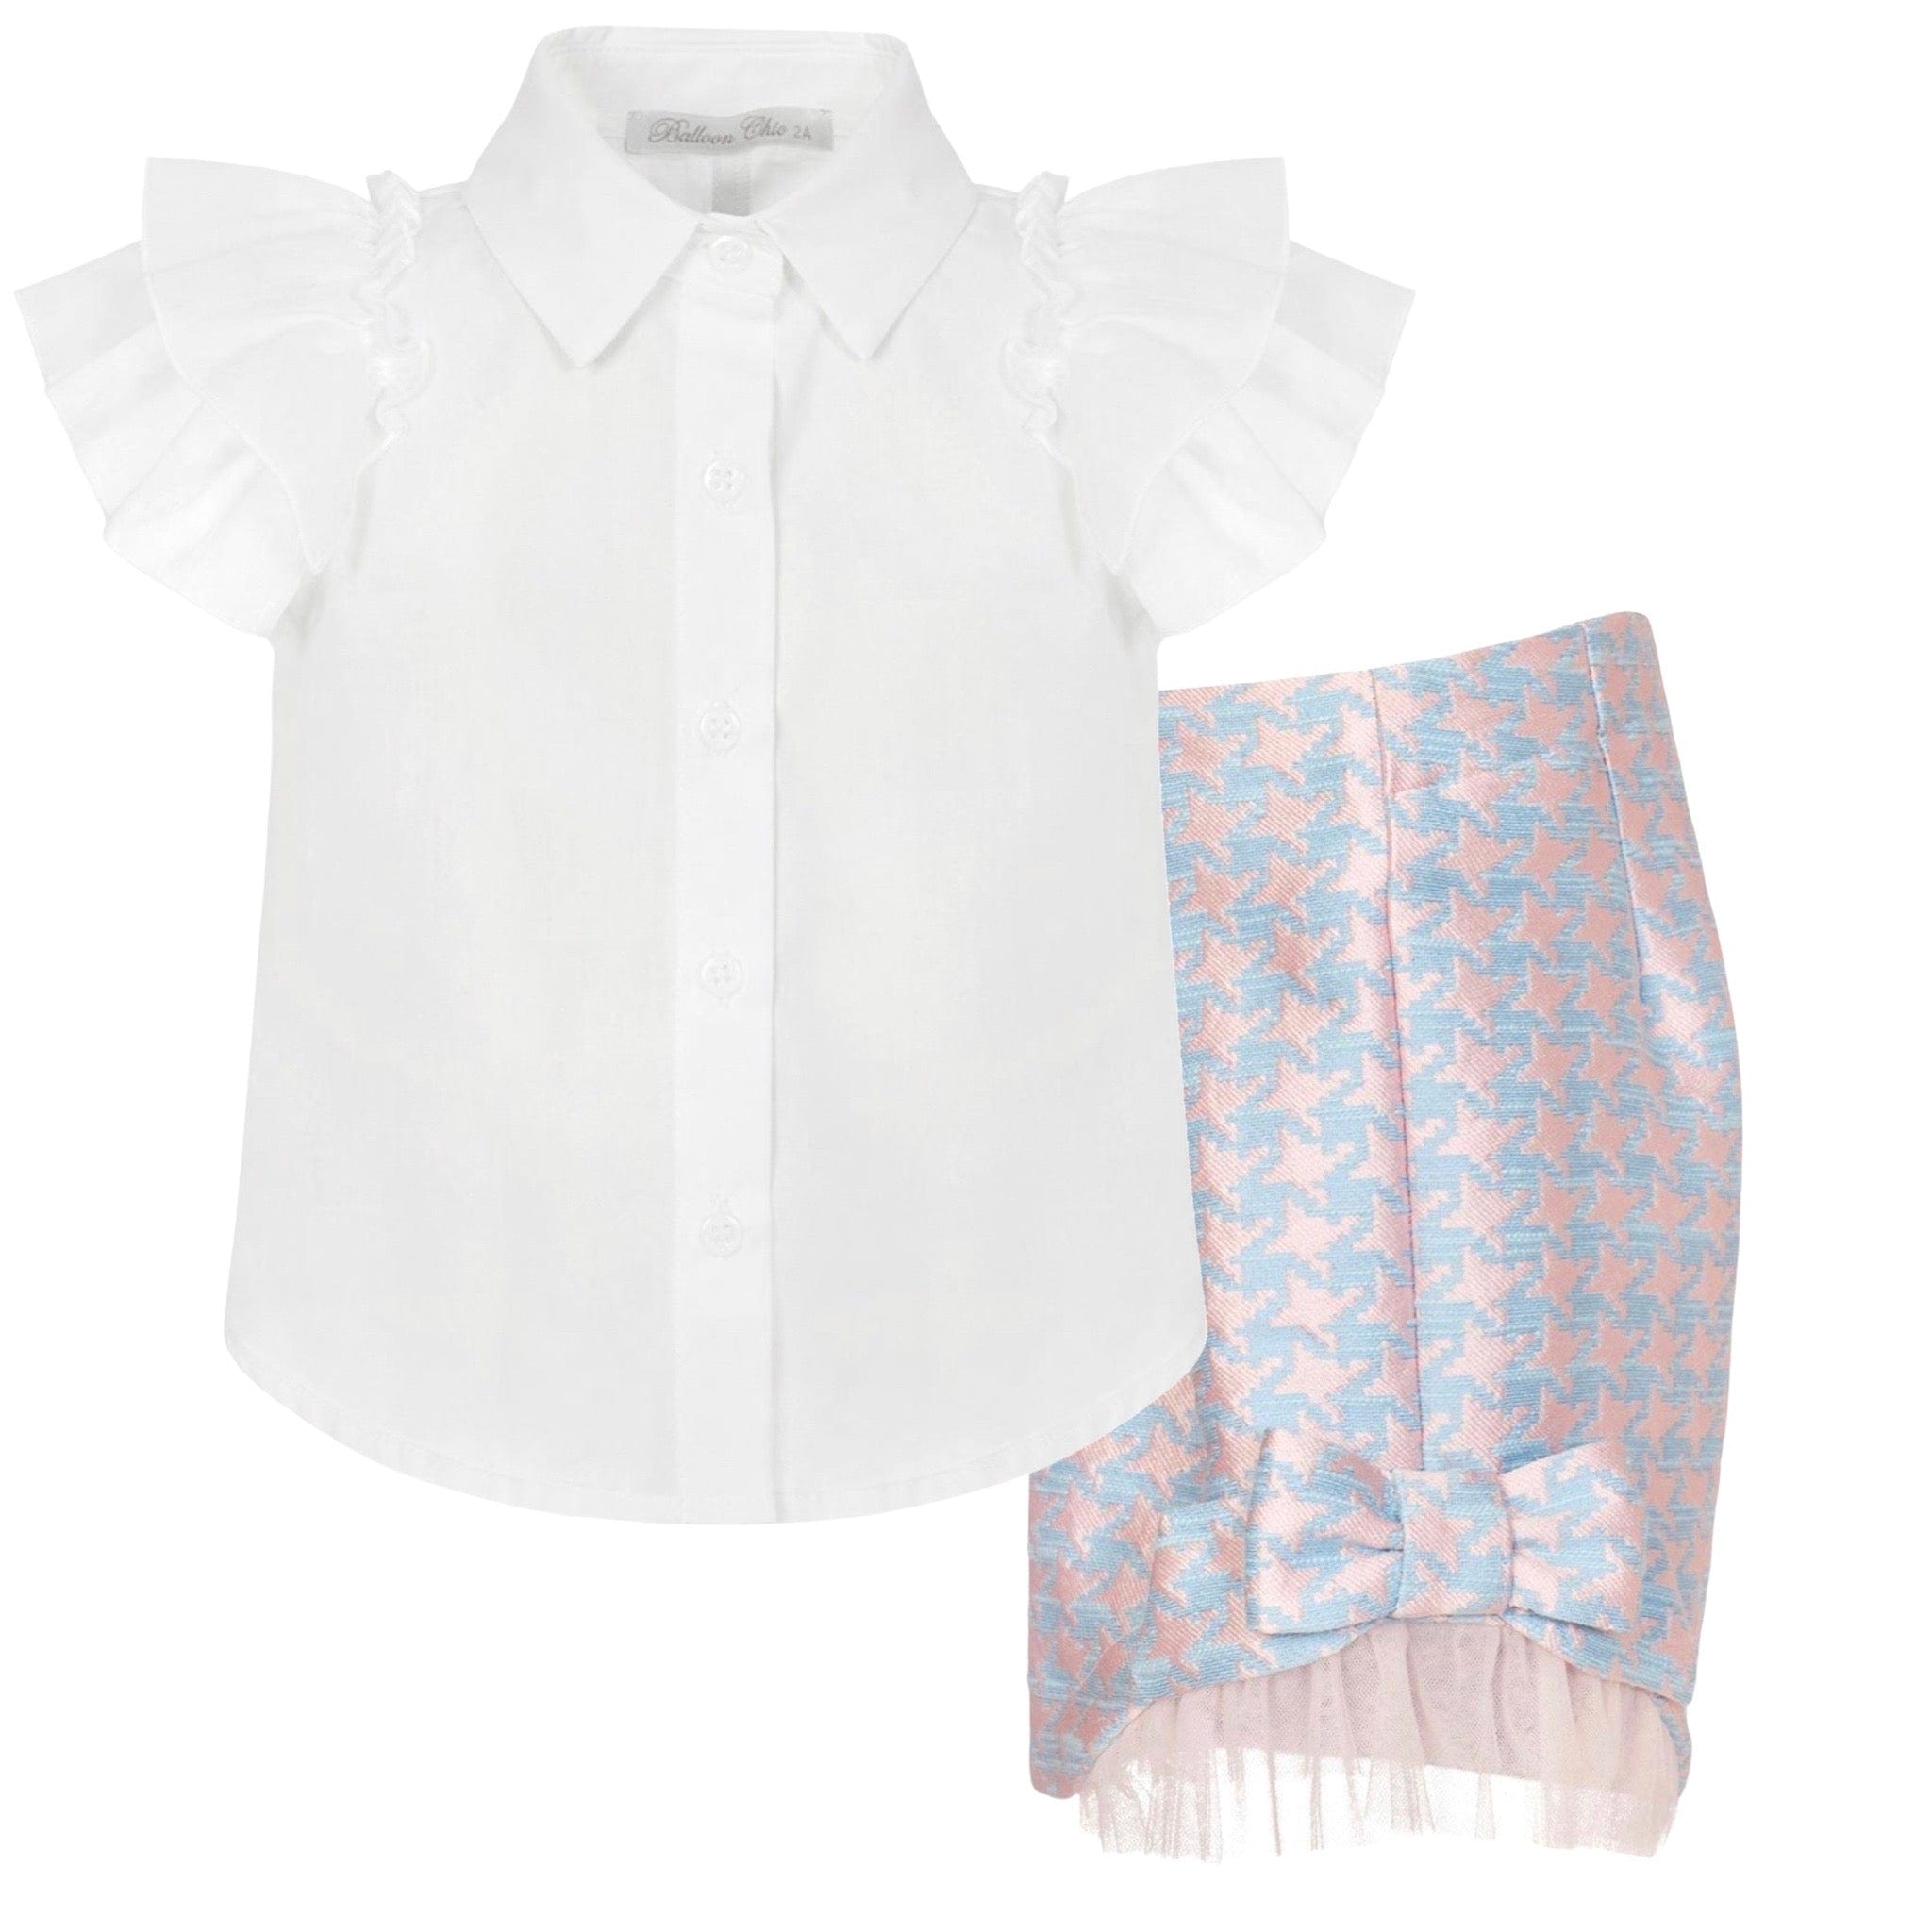 Balloon Chic Pink & Blue Girls Occasion Shorts Outfit